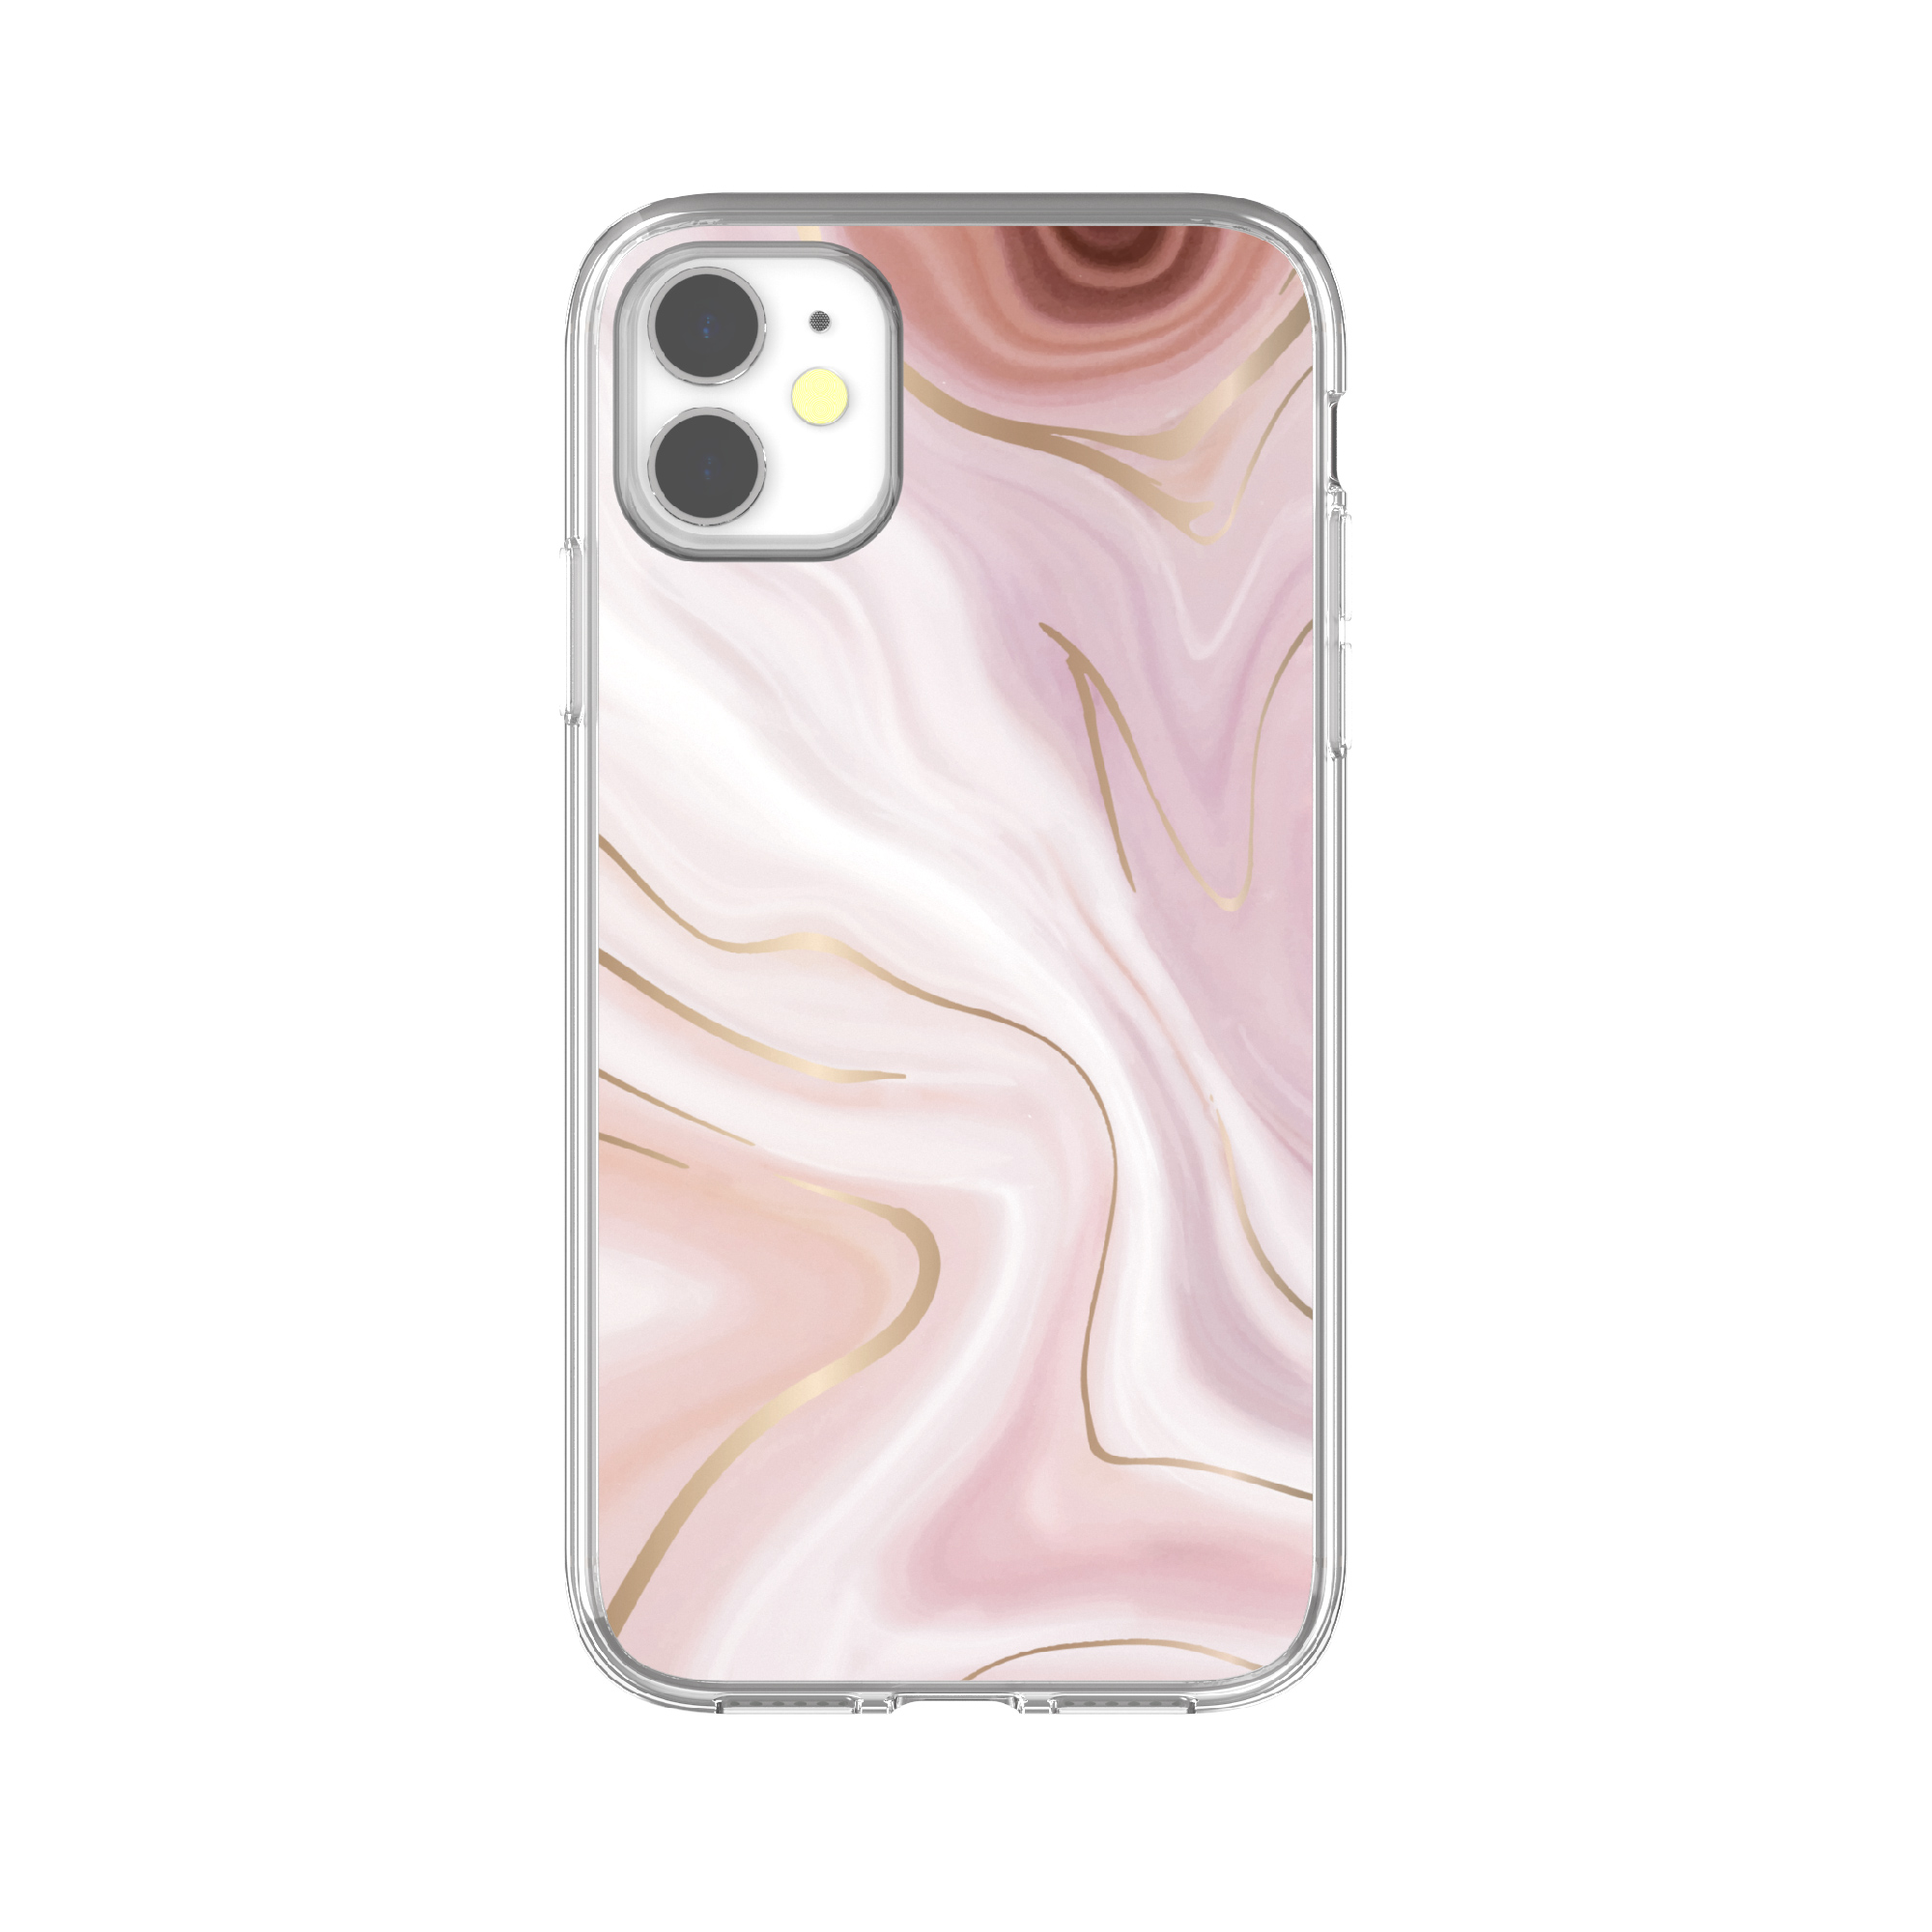 onn. Fashion Phone Case For iPhone 11, iPhone XR - image 1 of 7